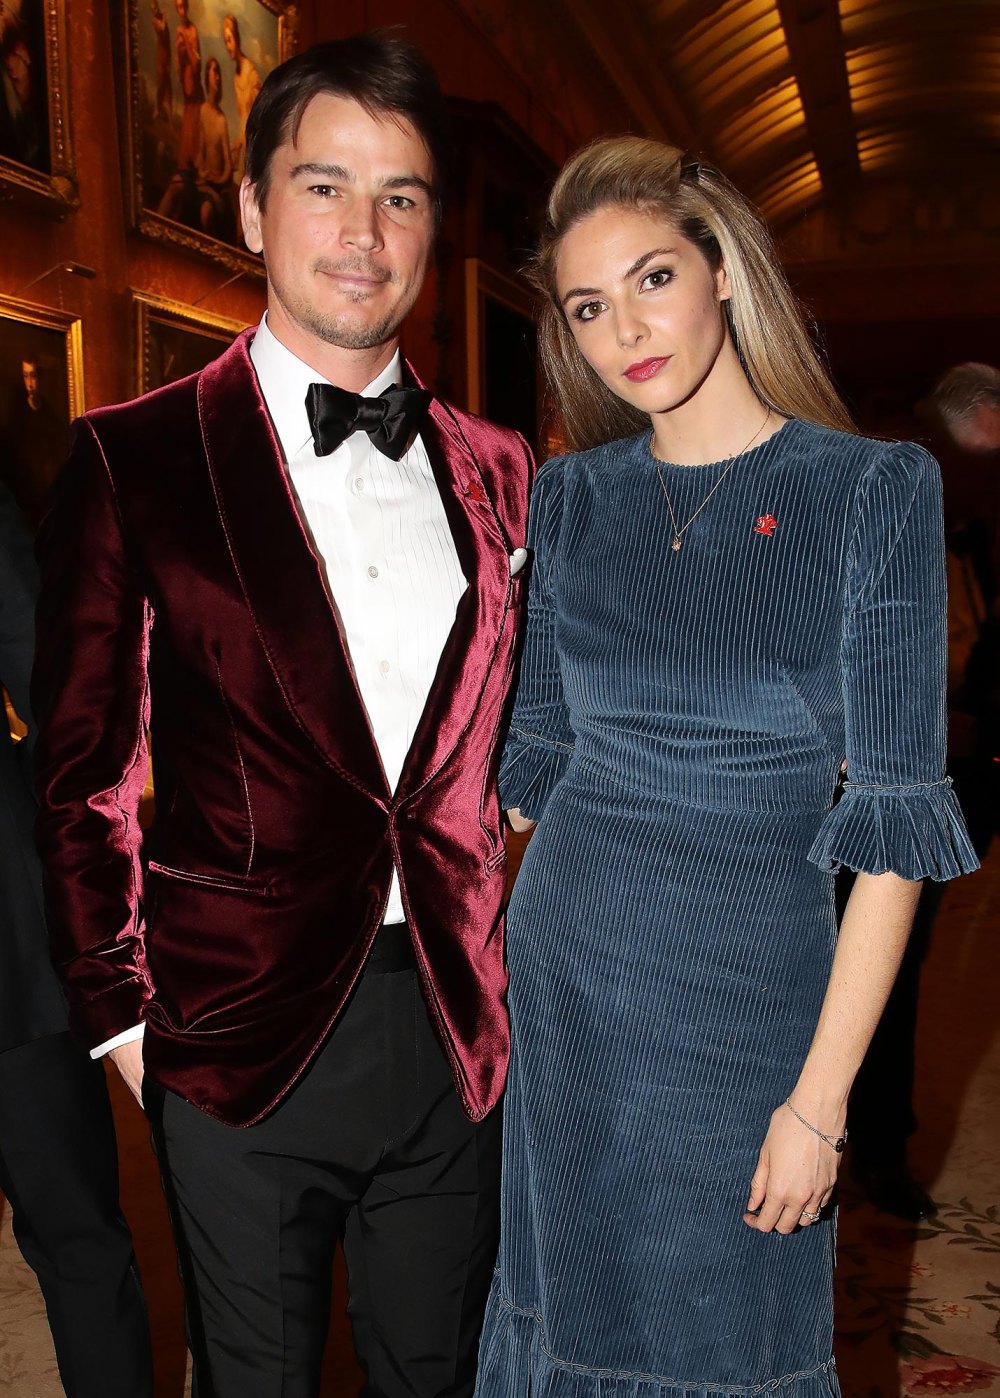 Josh Hartnett and Wife Tamsin Egerton Privately Welcomed Baby No 4